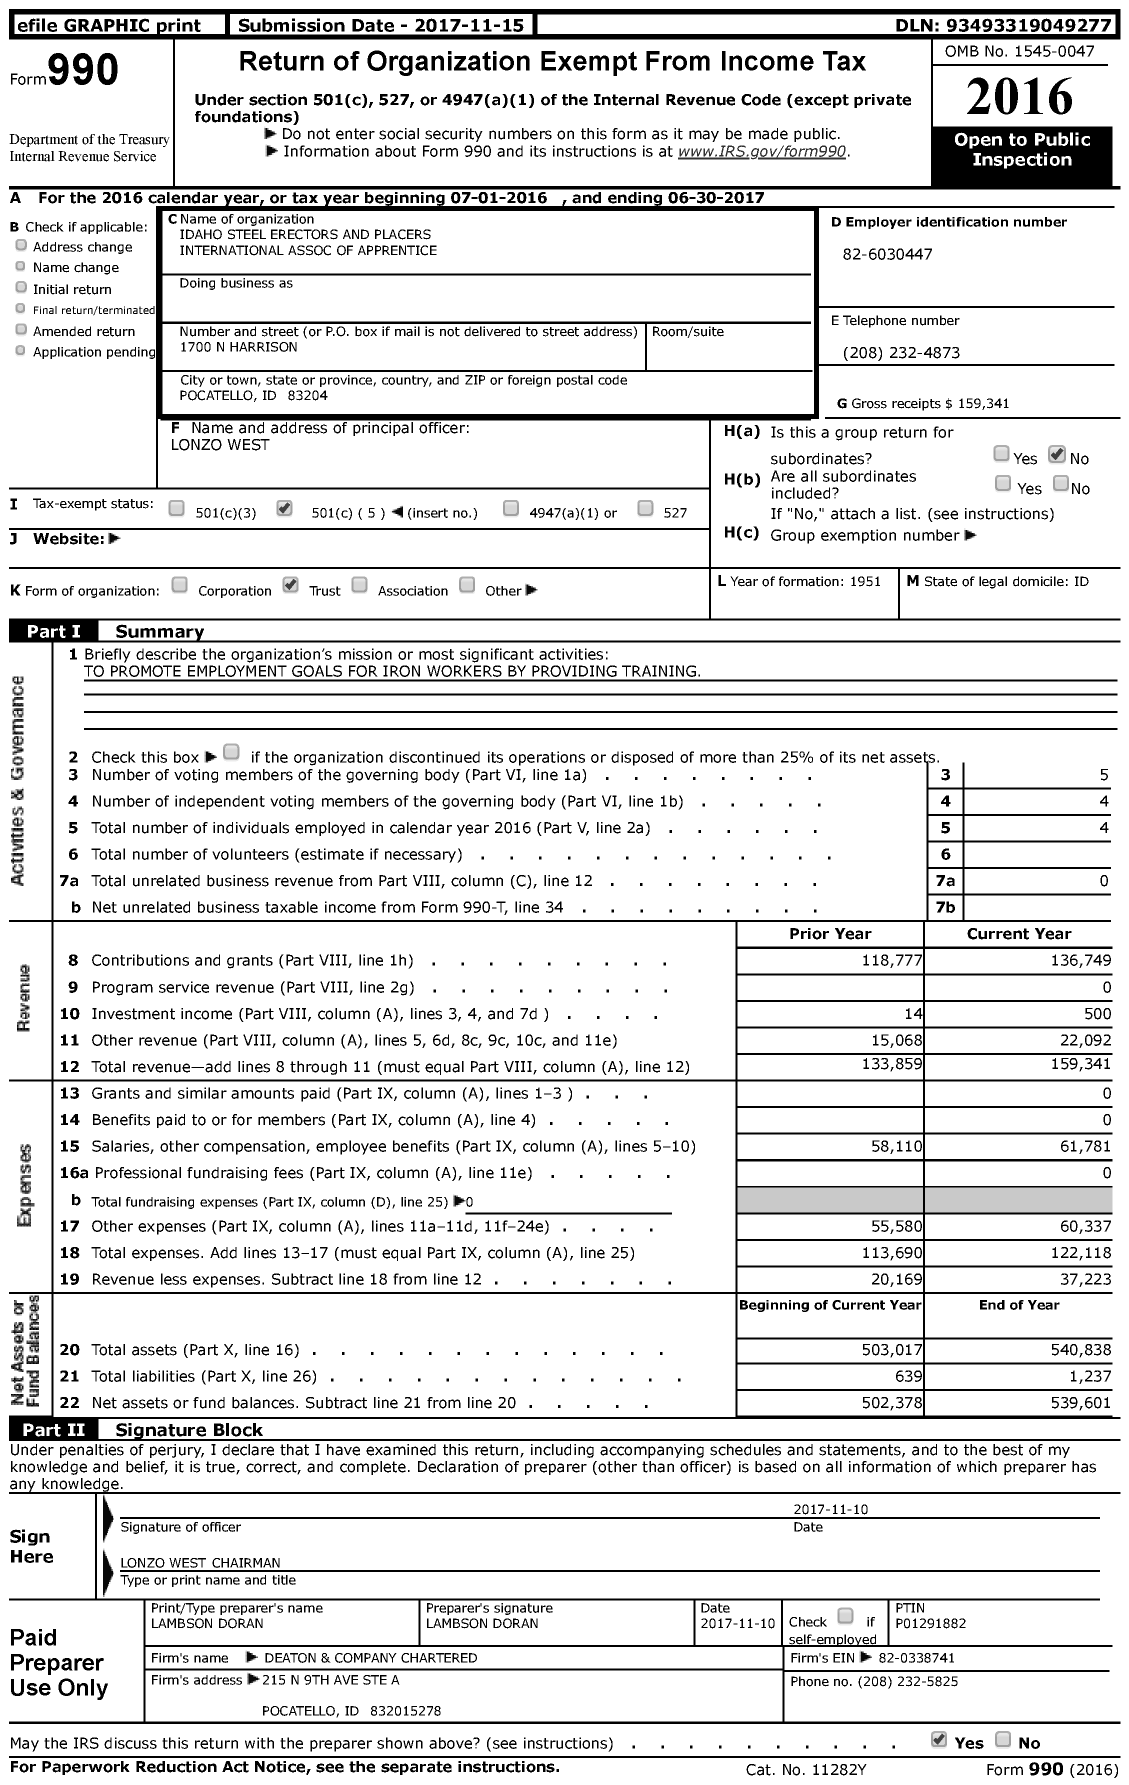 Image of first page of 2016 Form 990 for Idaho Steel Erectors and Placers International Association of Apprentice